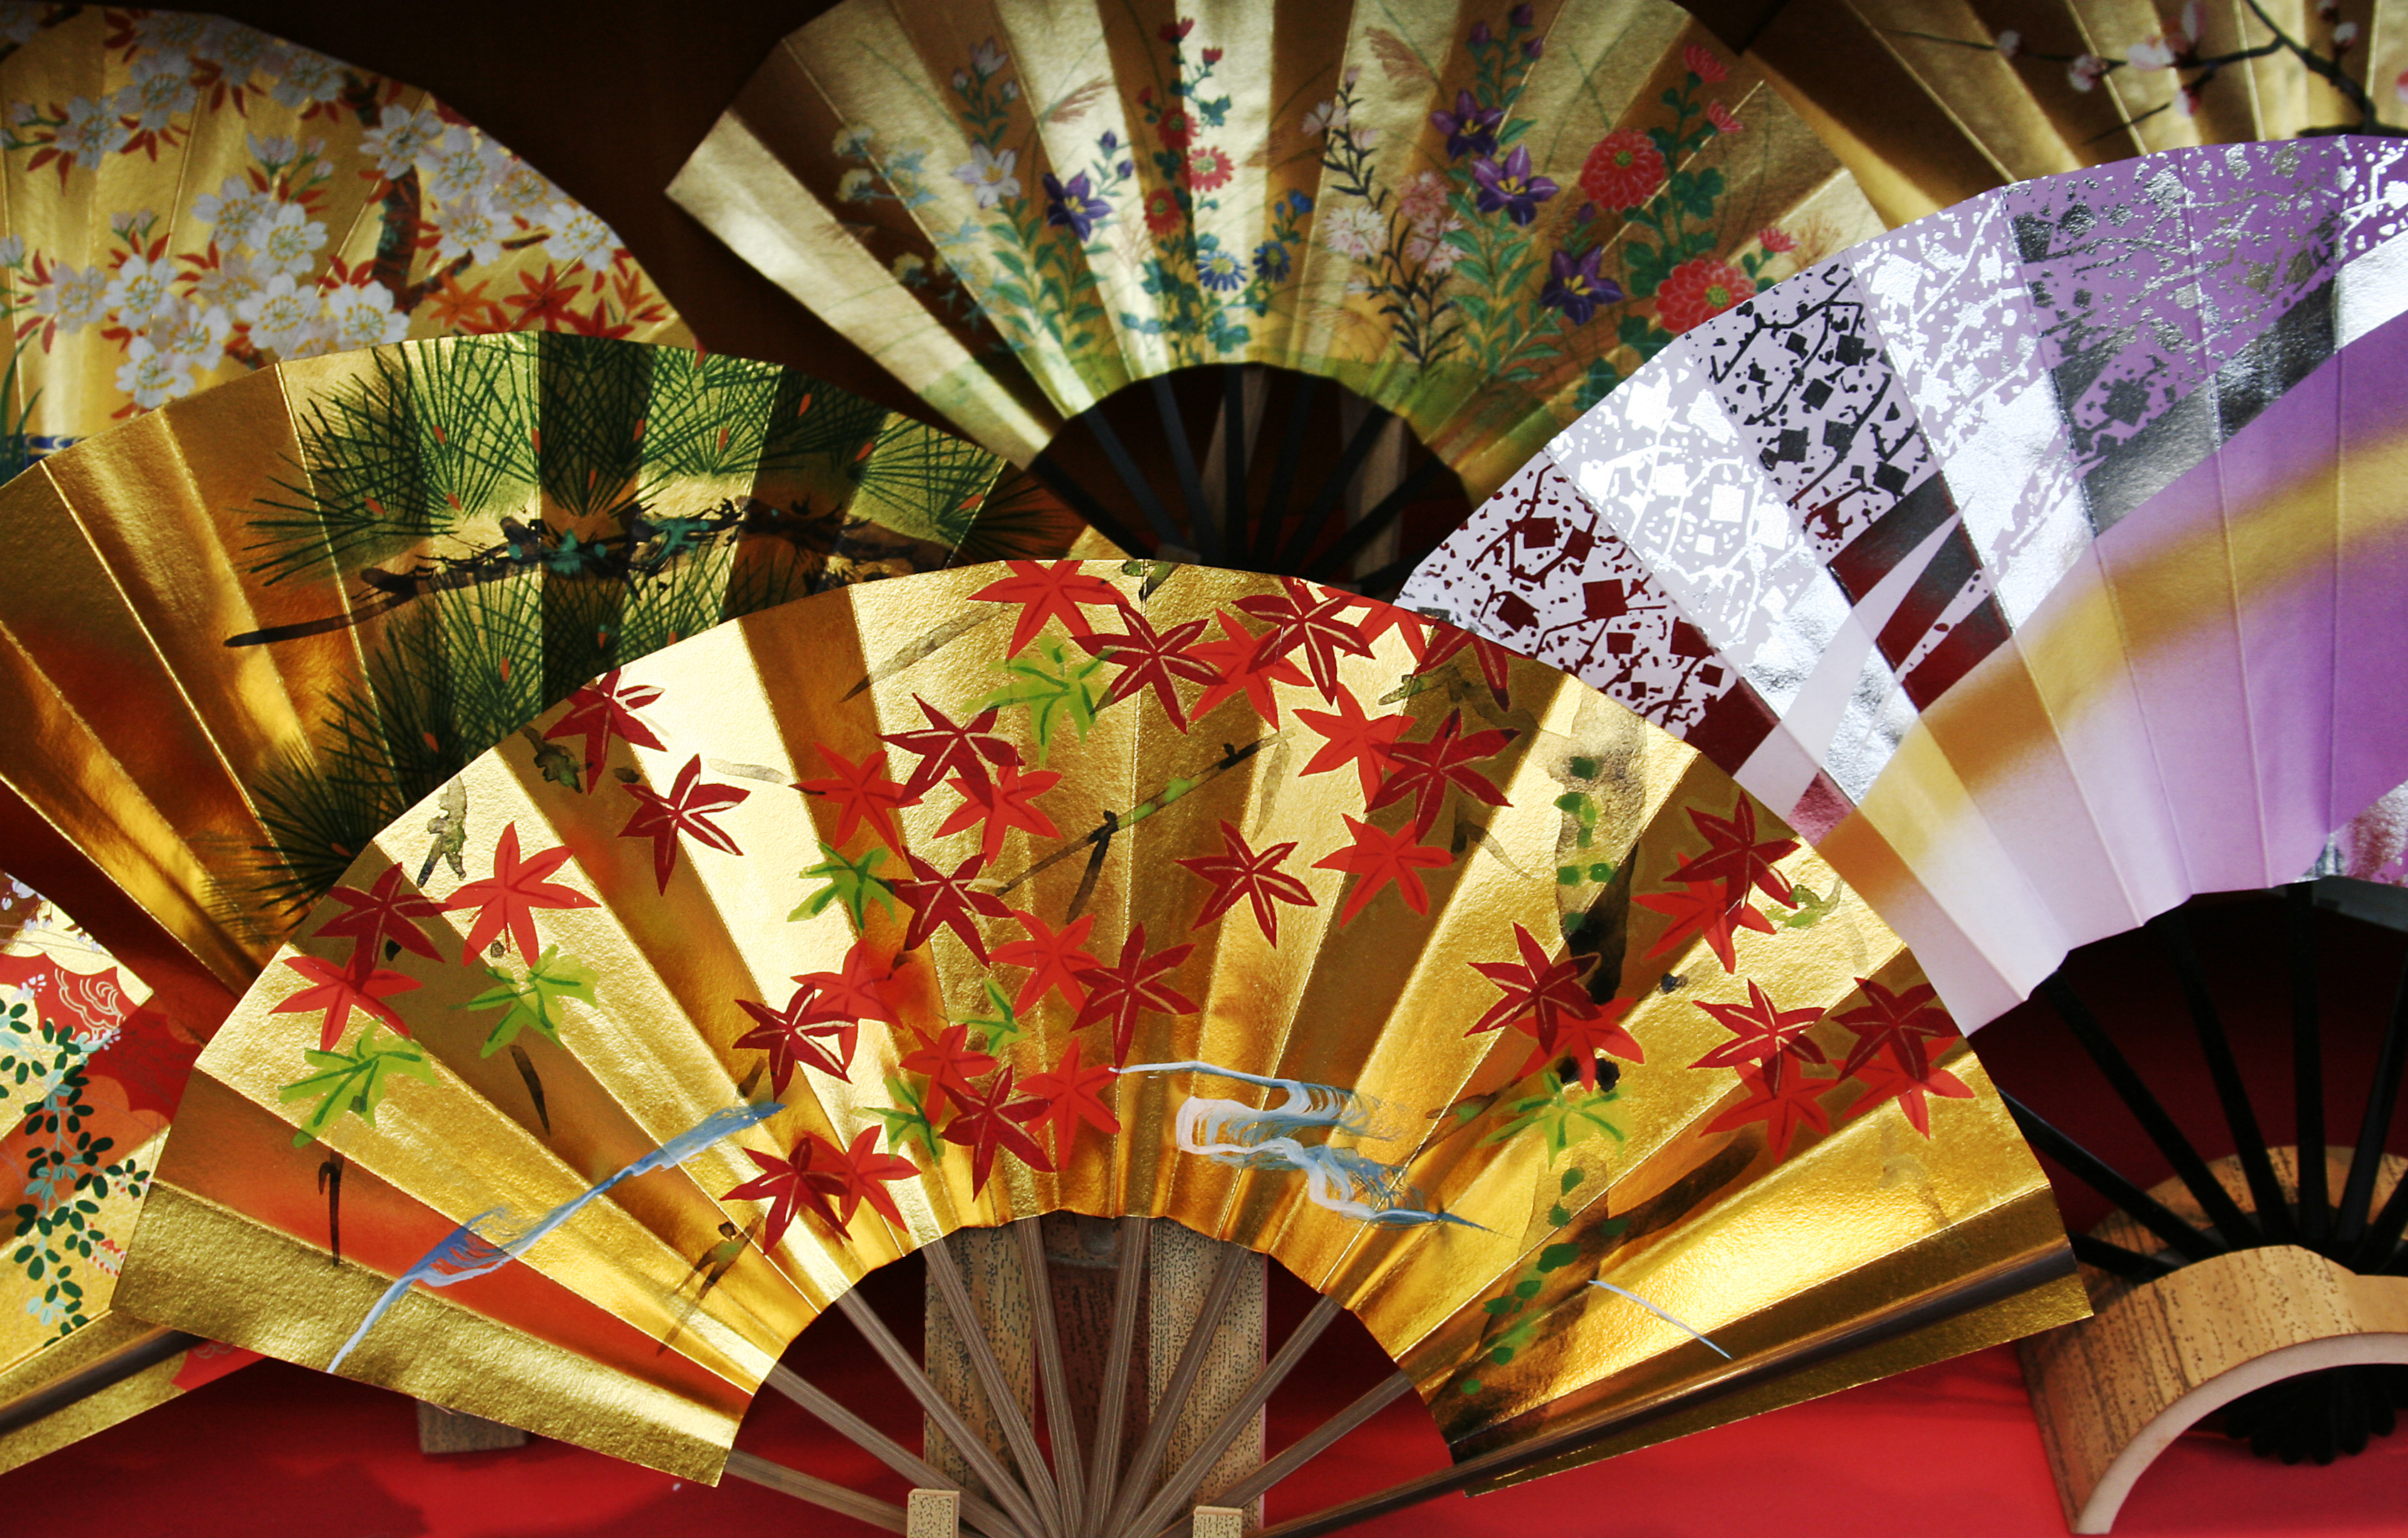 Folding fans with Japanese patterns